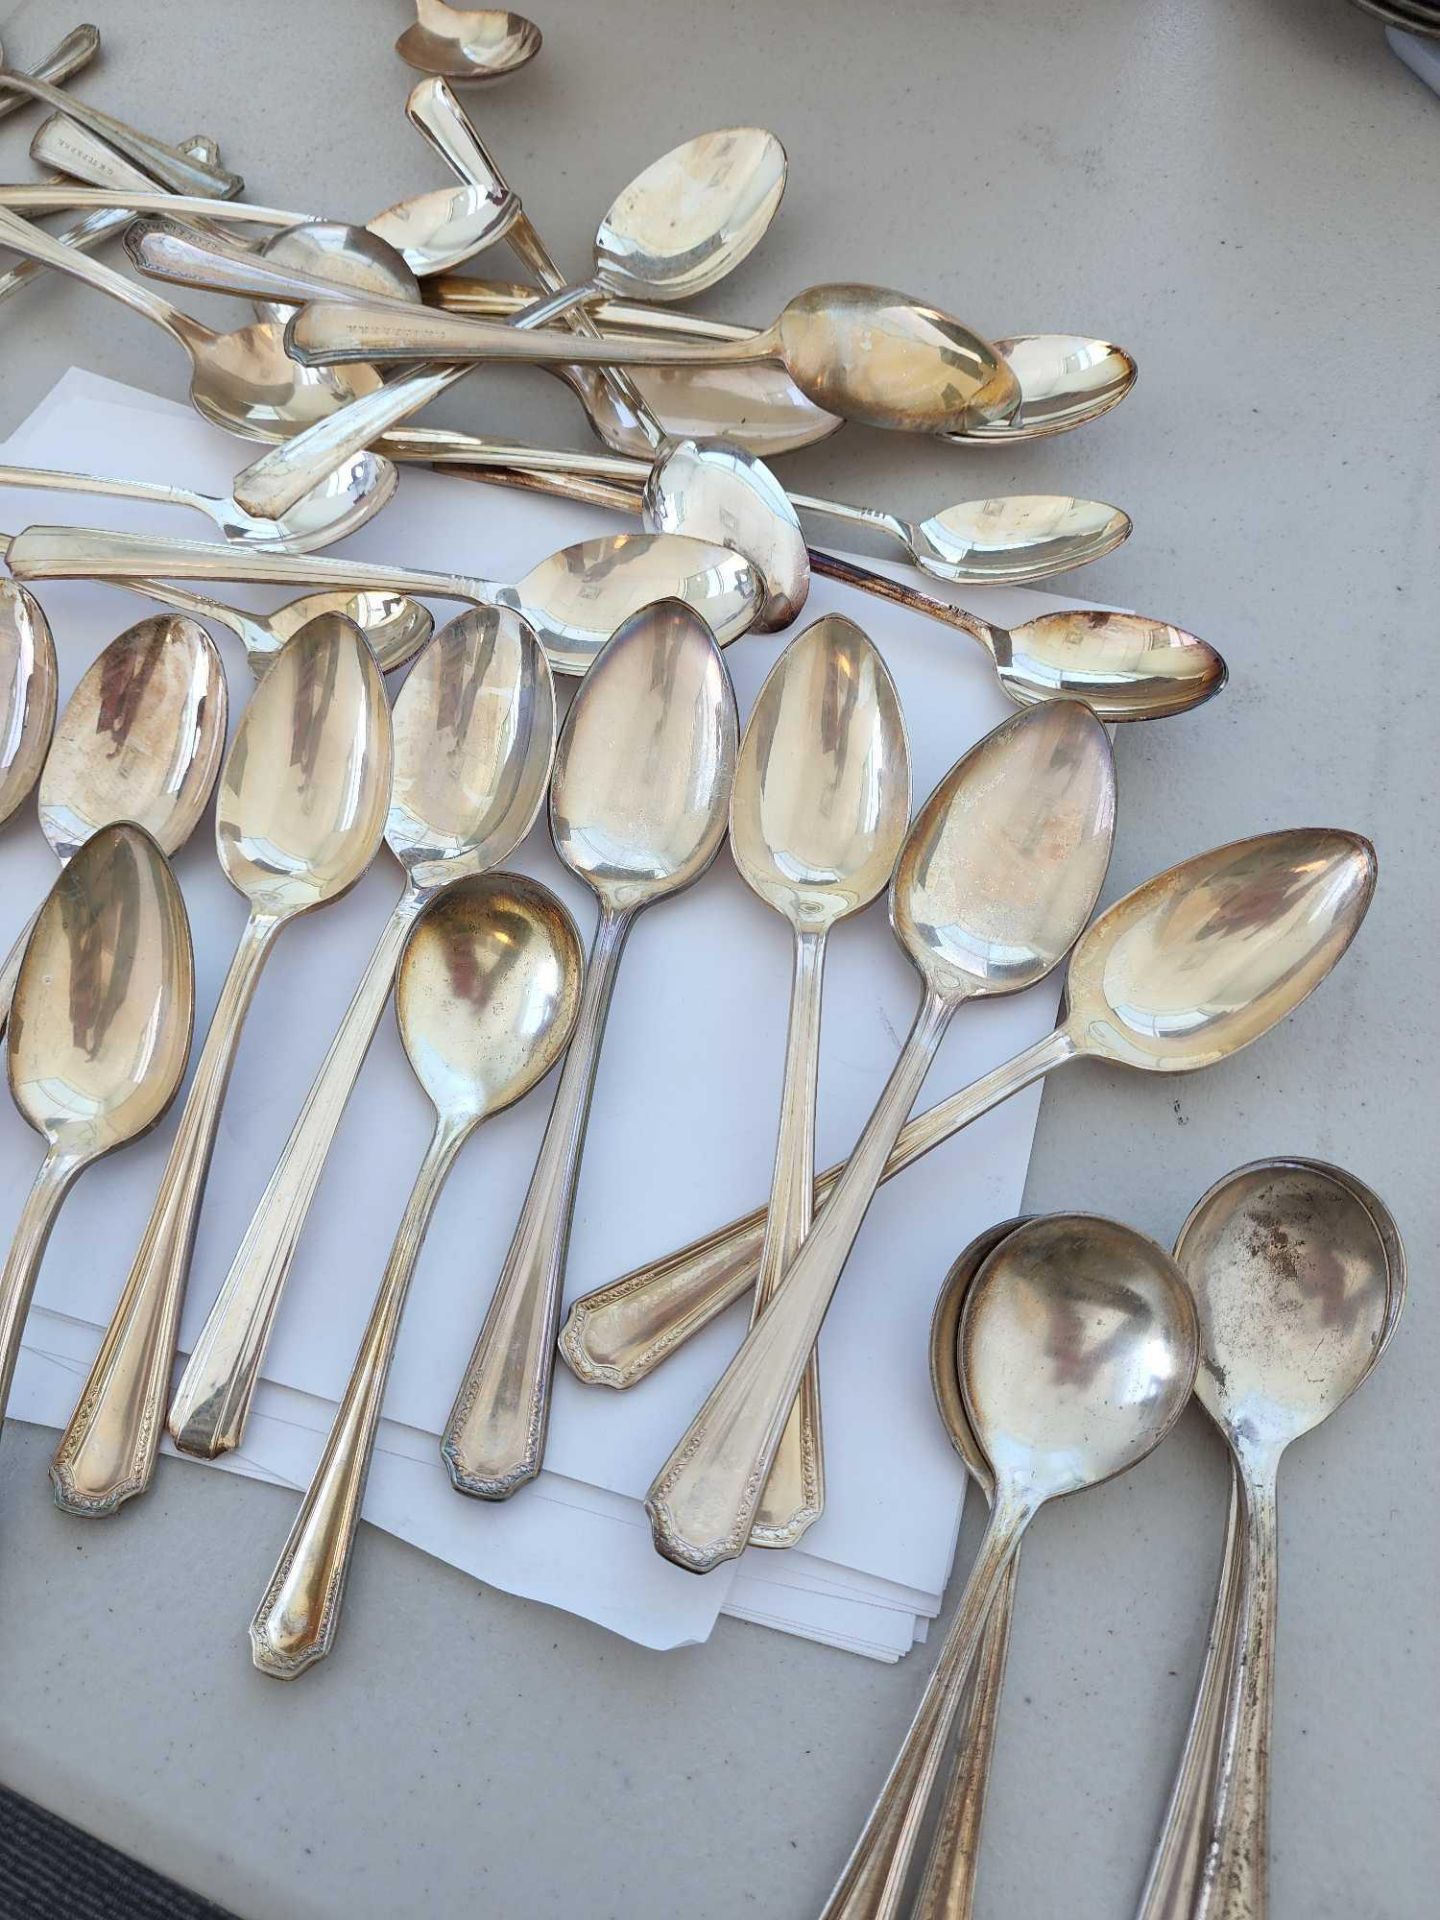 Antique Silver Plated Spoons